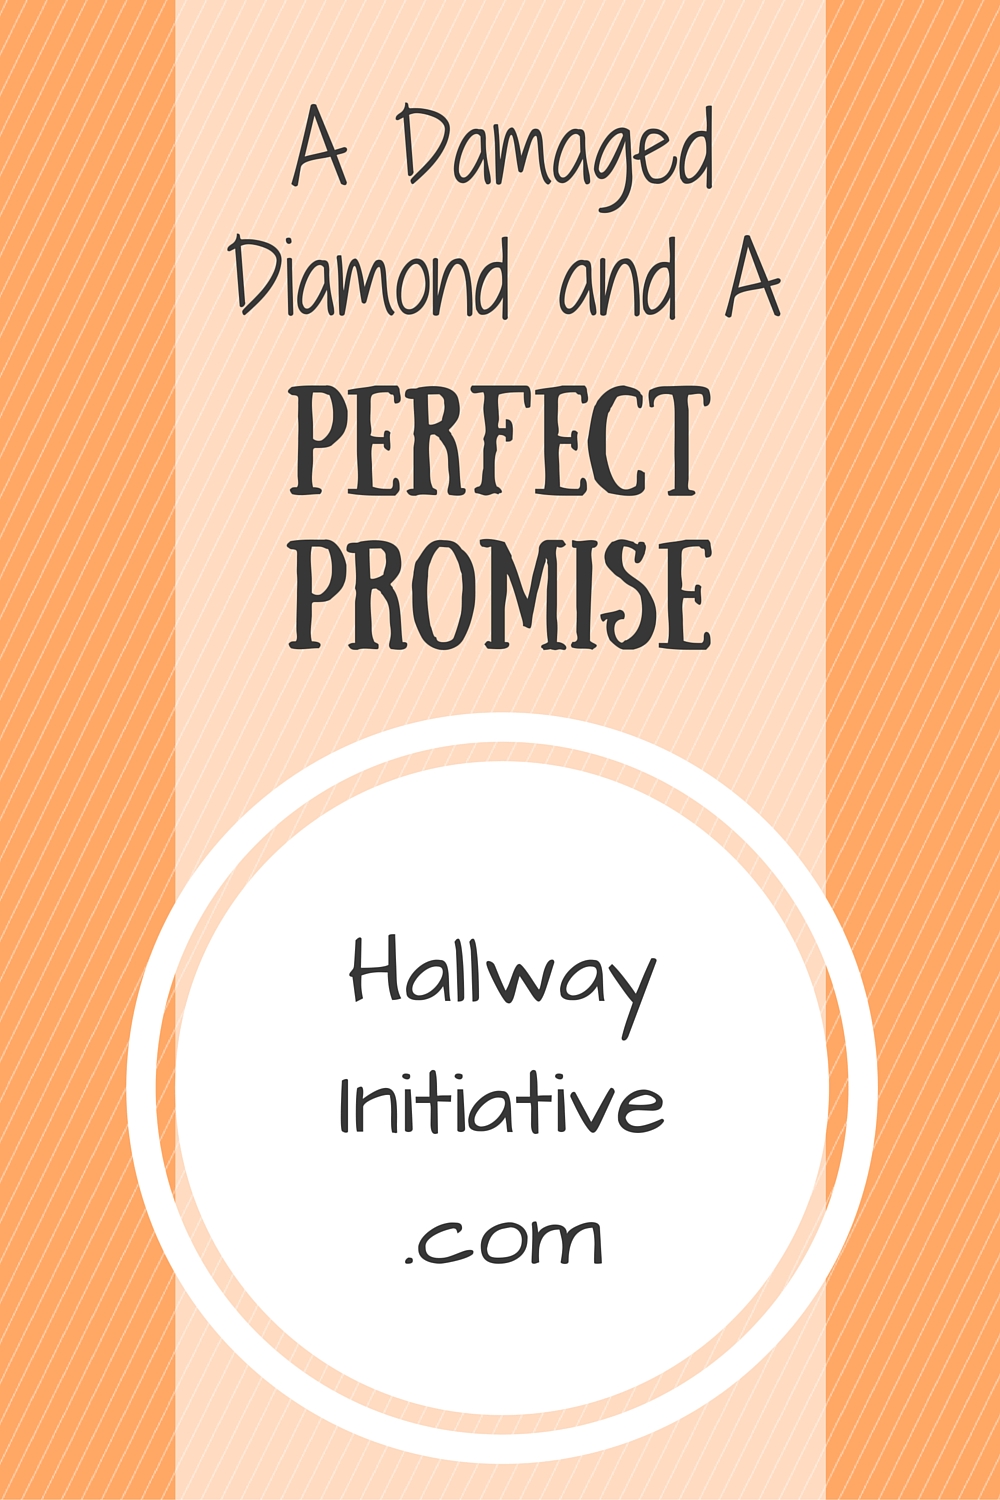 A damaged diamond and a perfect promise